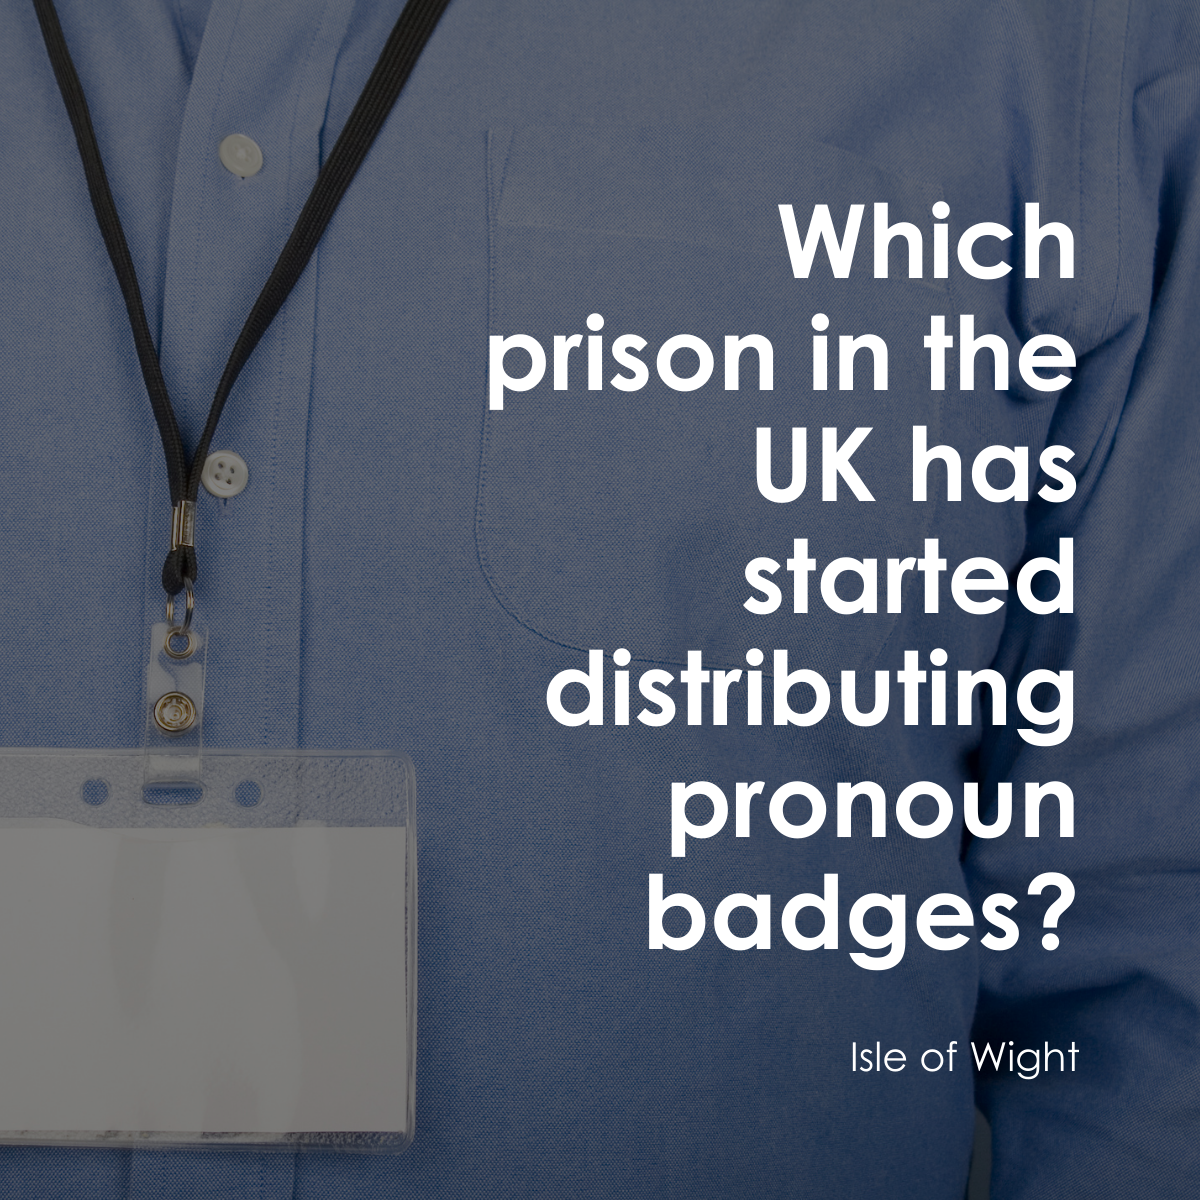 Image reading "Which prison in the UK has started distributing pronoun badges? Isle of Wight"